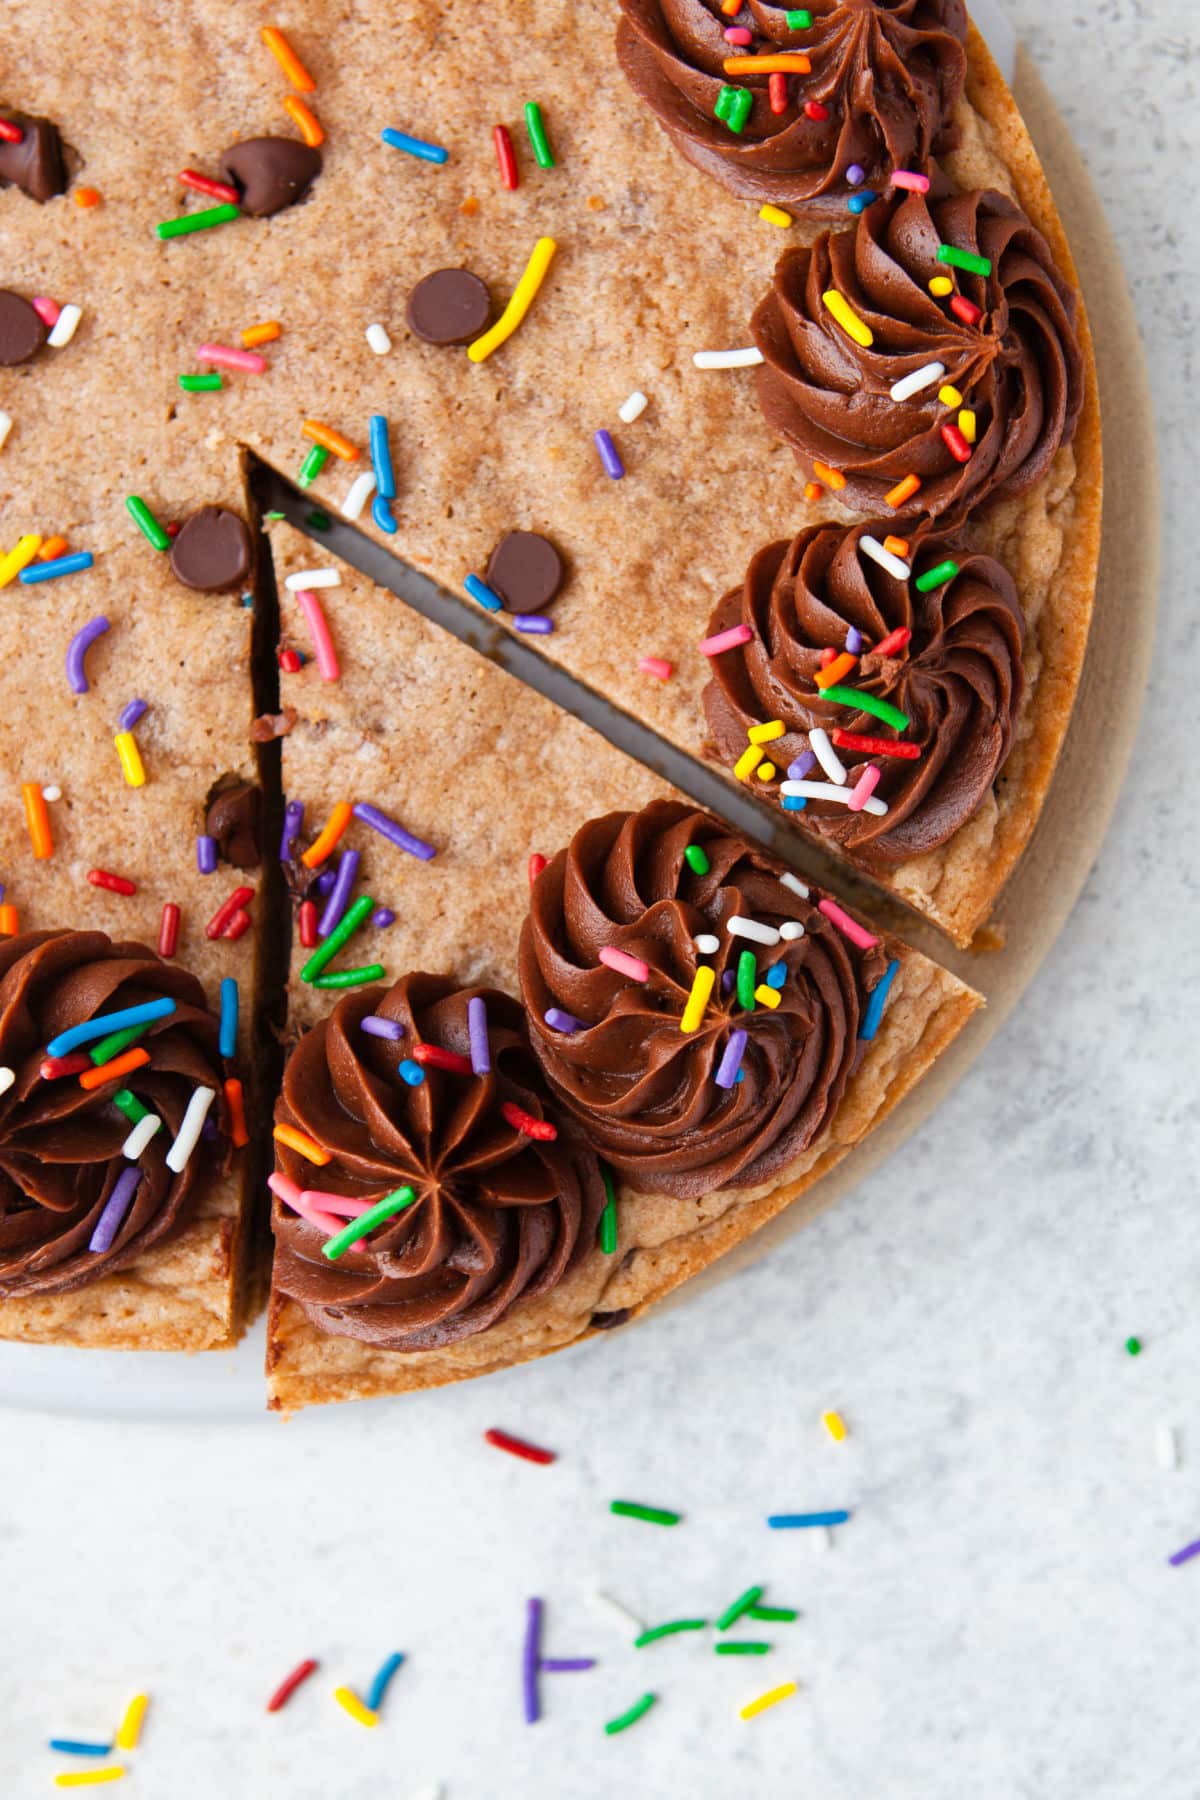 https://www.ihearteating.com/wp-content/uploads/2023/02/chocolate-chip-cookie-cake-19-1200.jpg